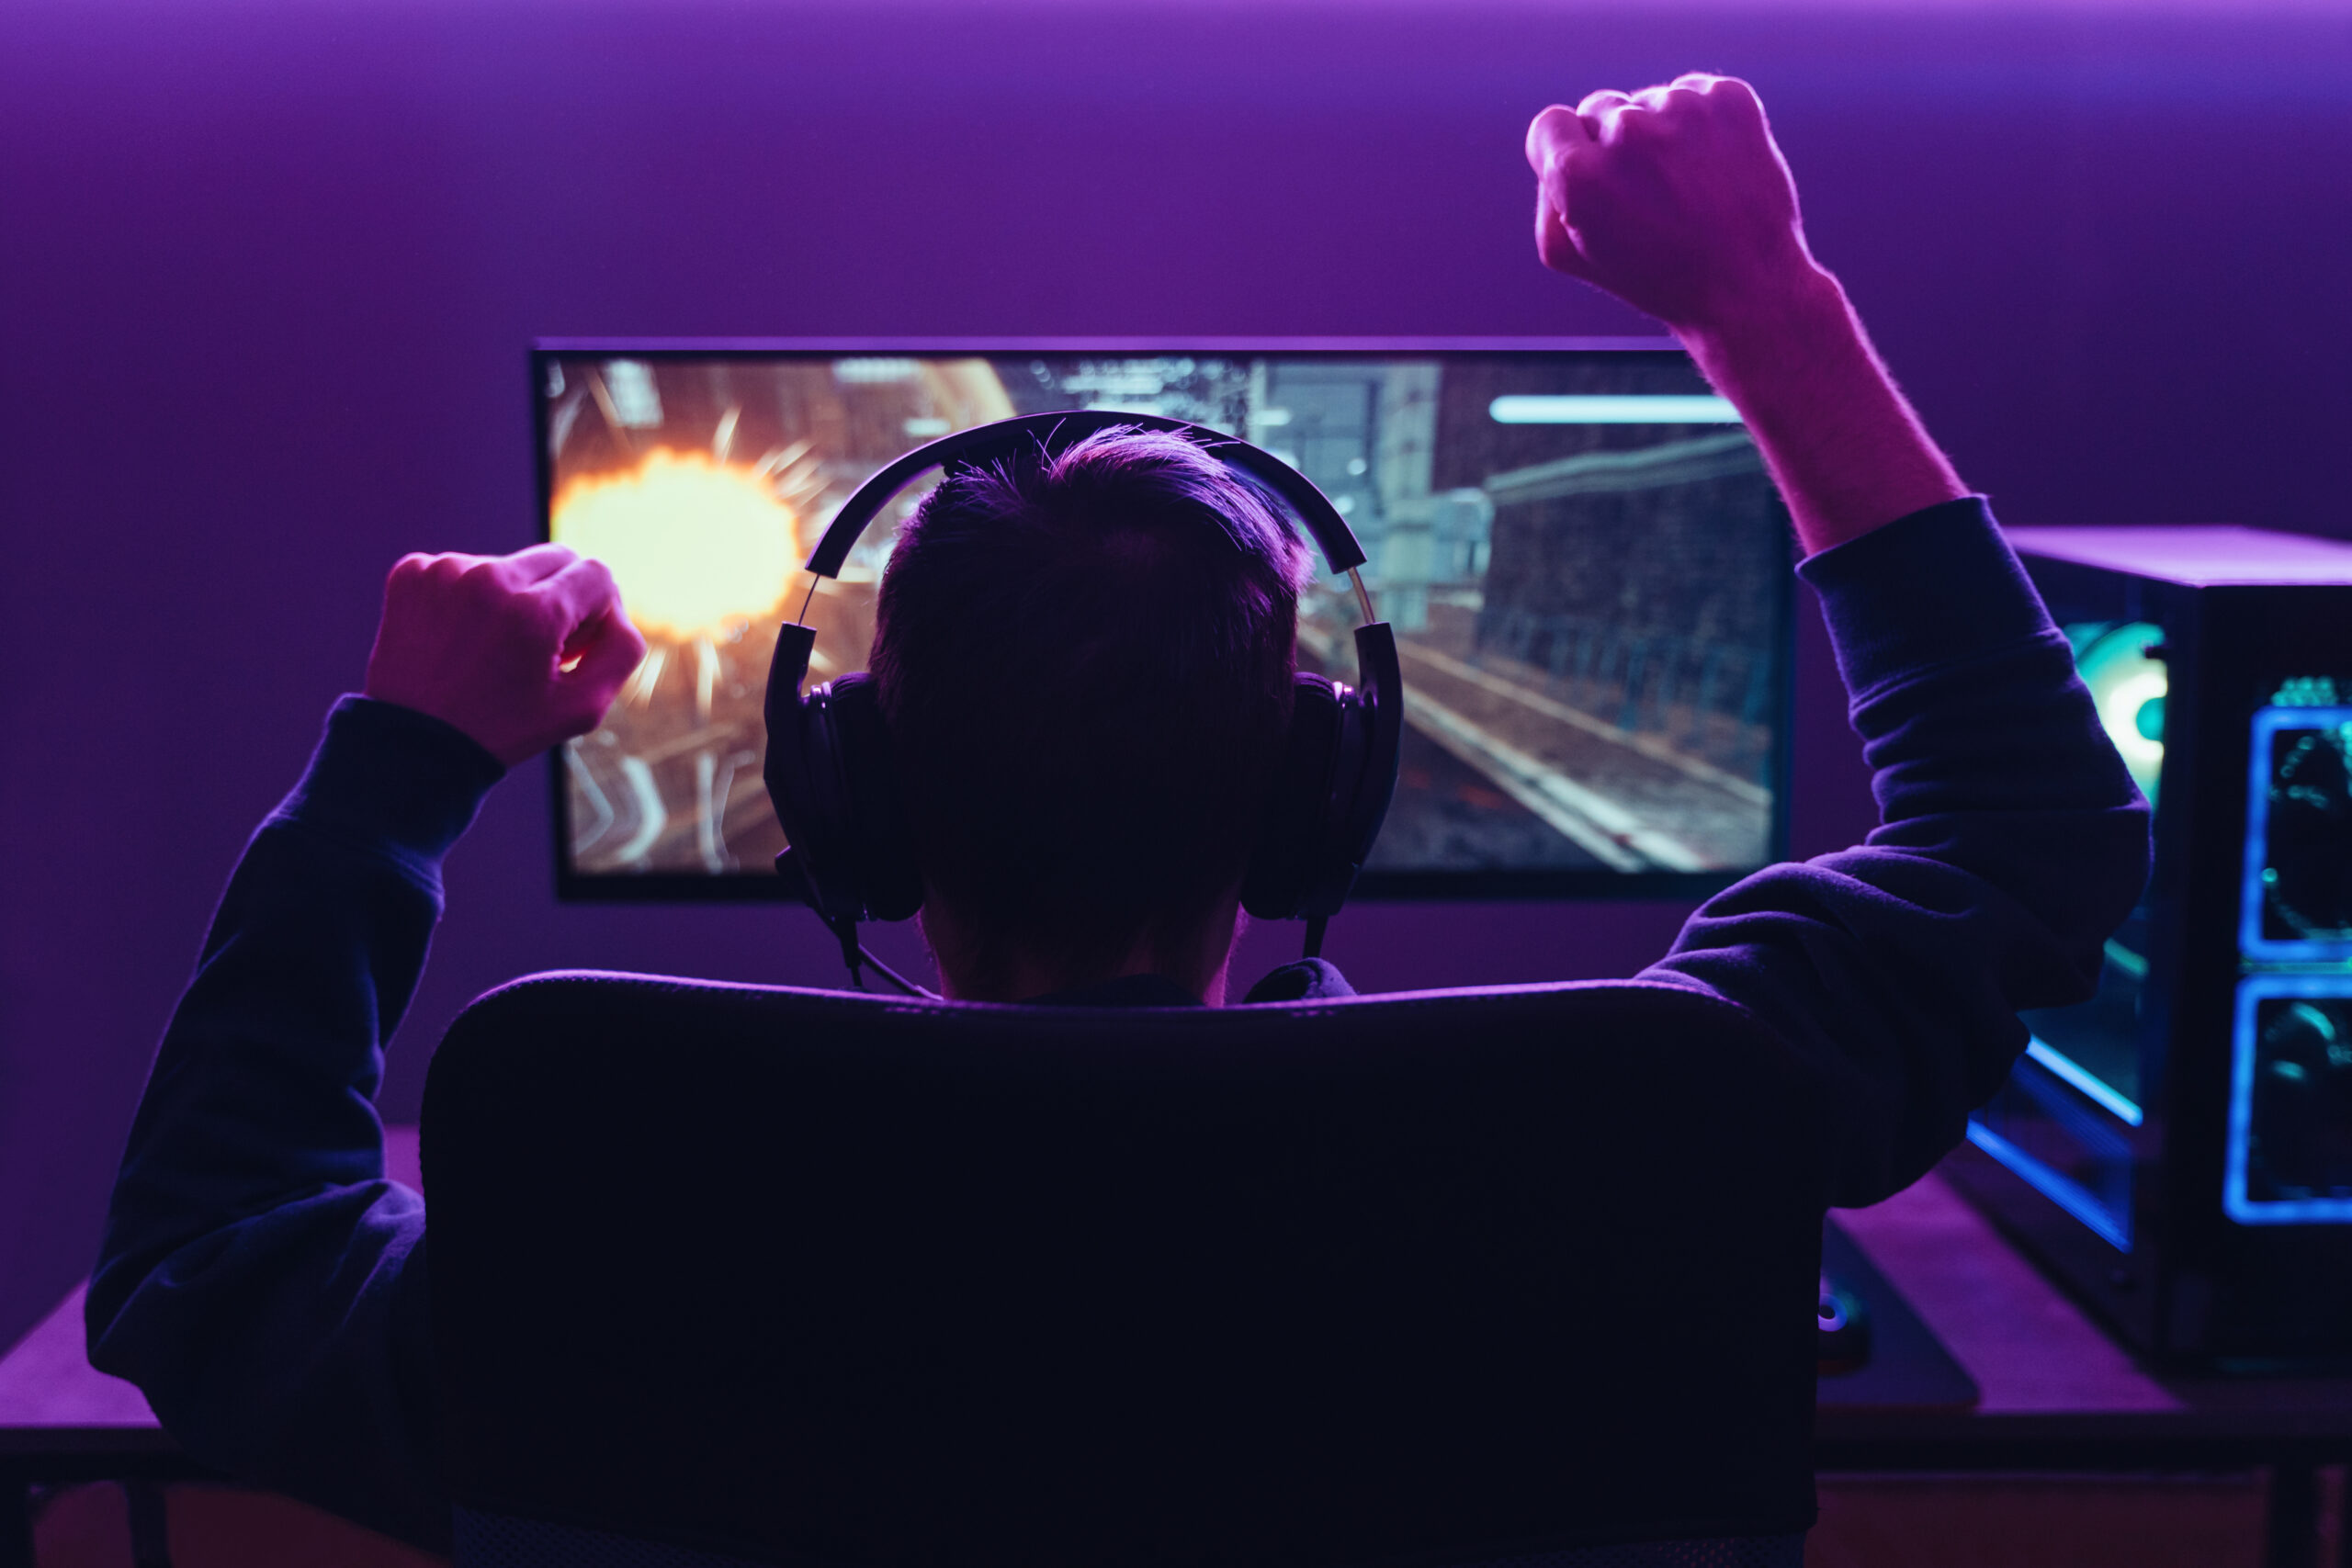 Gamer raising his arms in victory